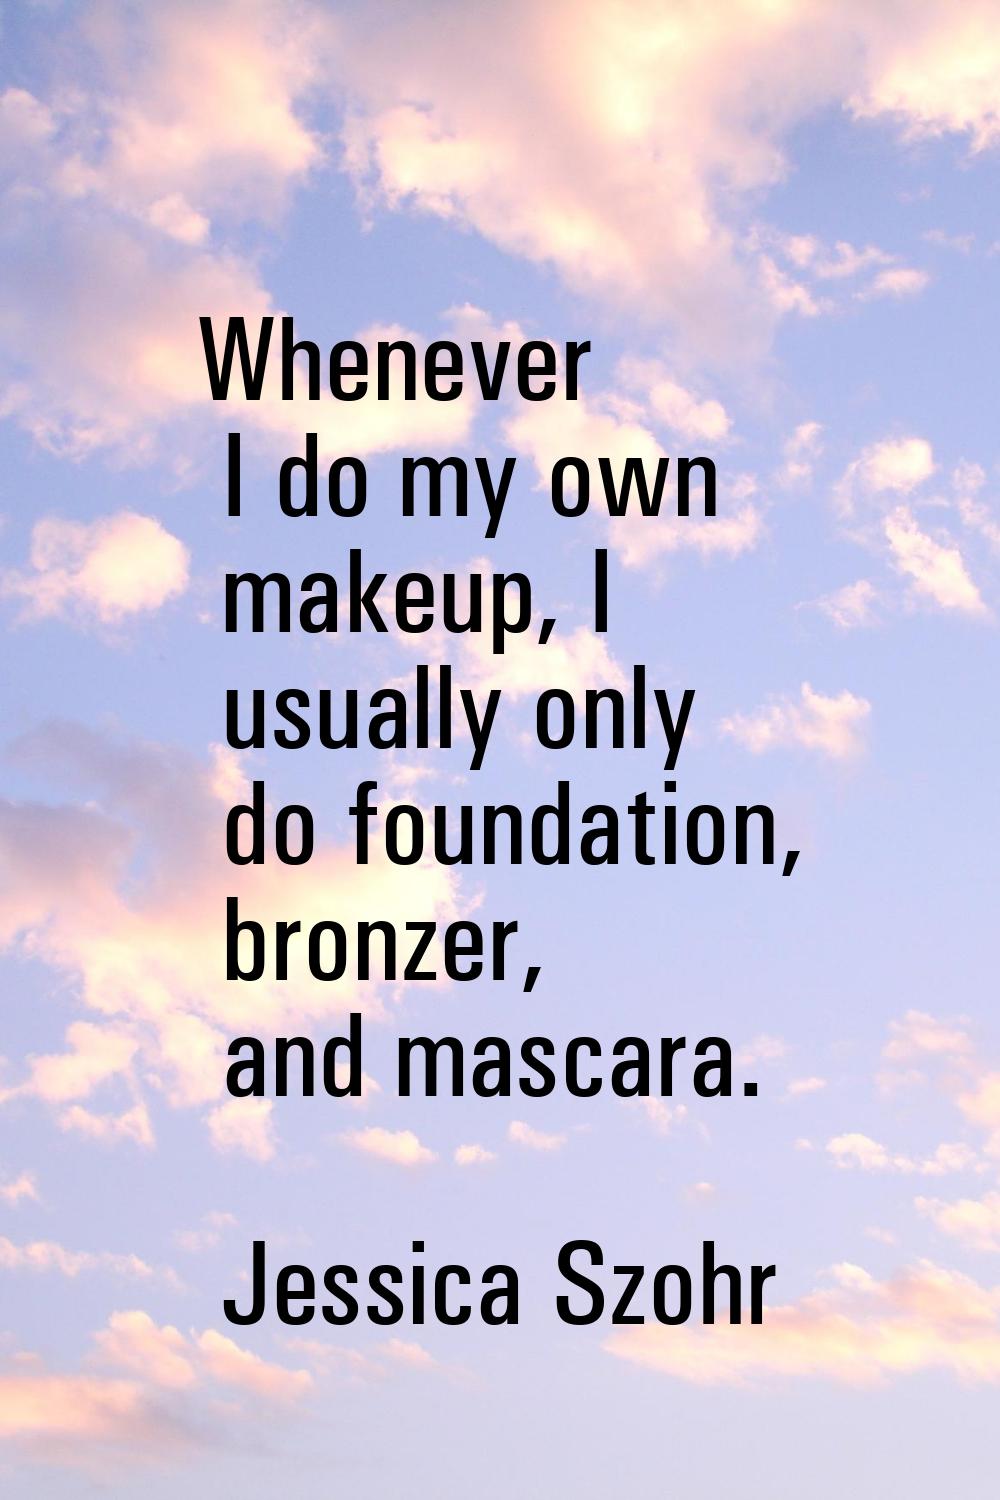 Whenever I do my own makeup, I usually only do foundation, bronzer, and mascara.